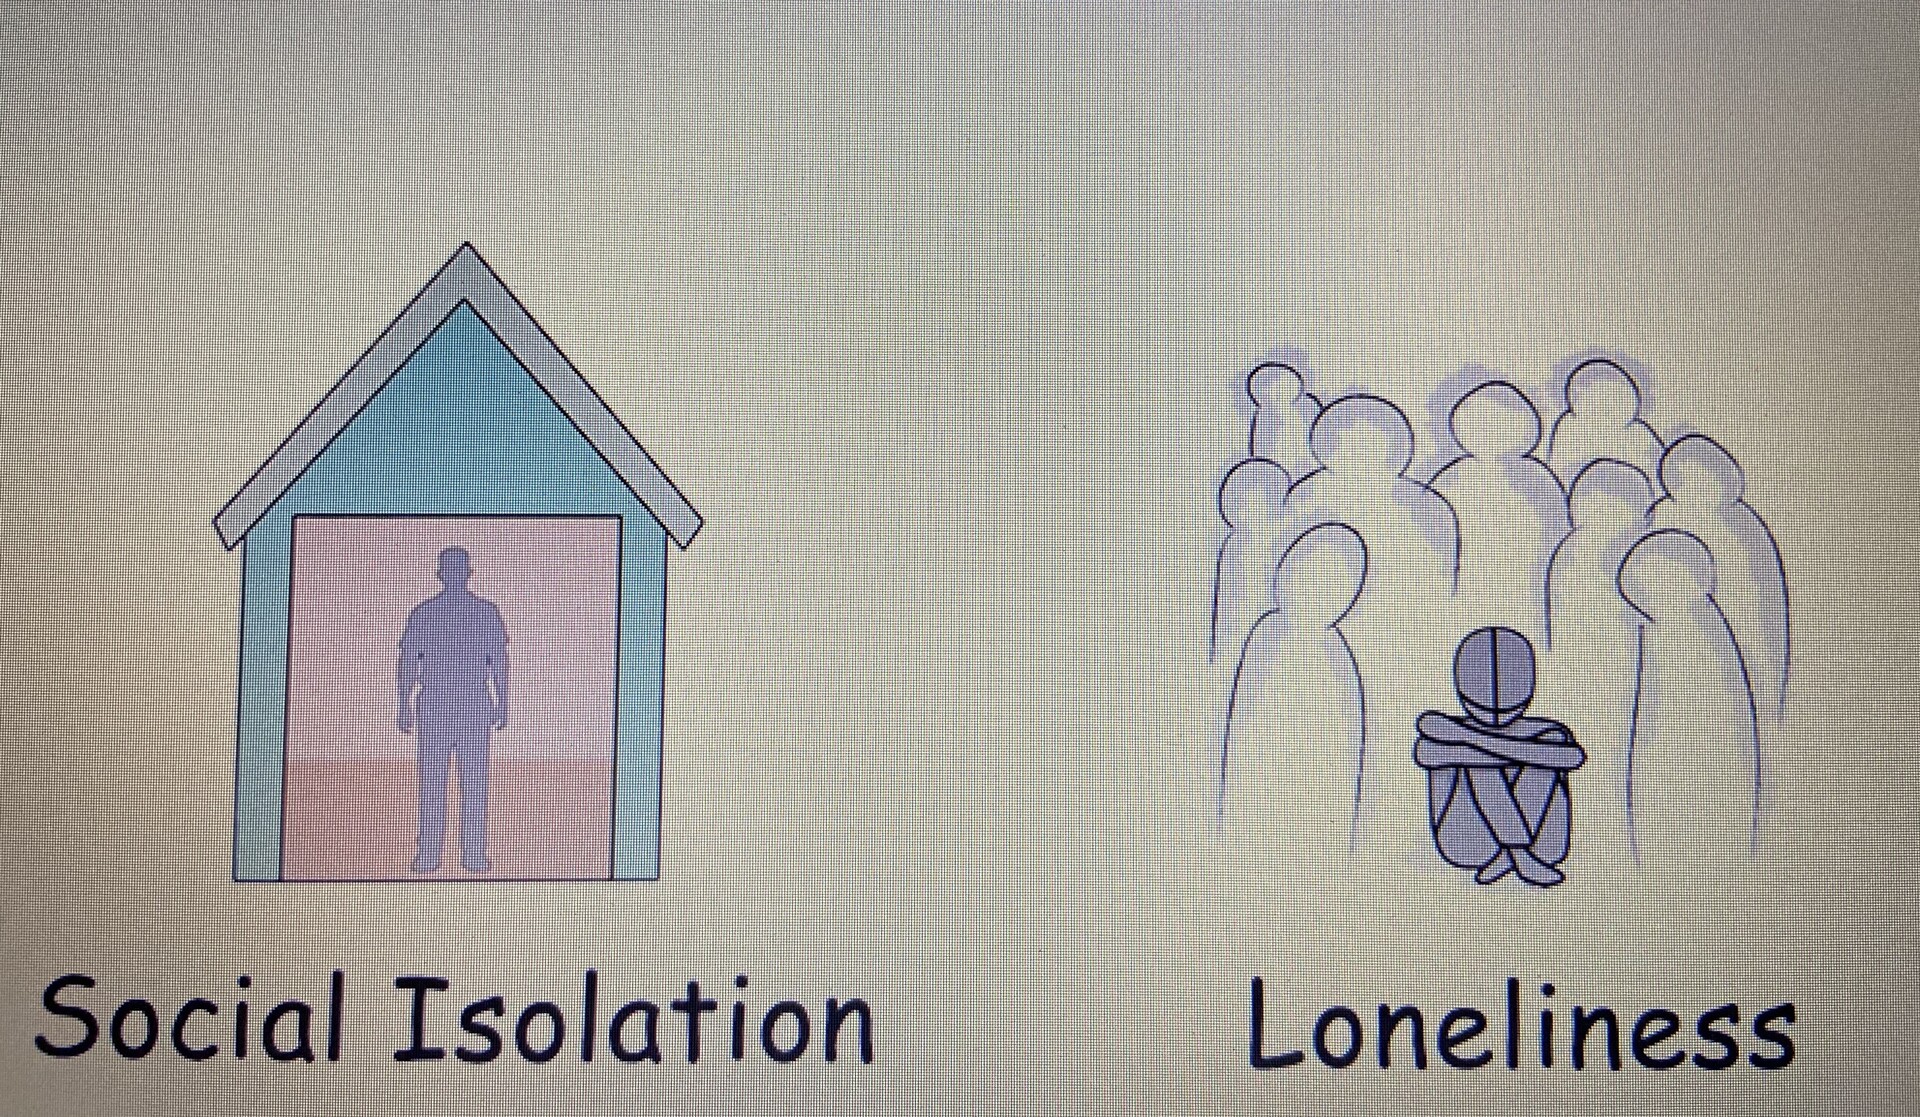 What Is the Difference Between Loneliness and Social Isolation